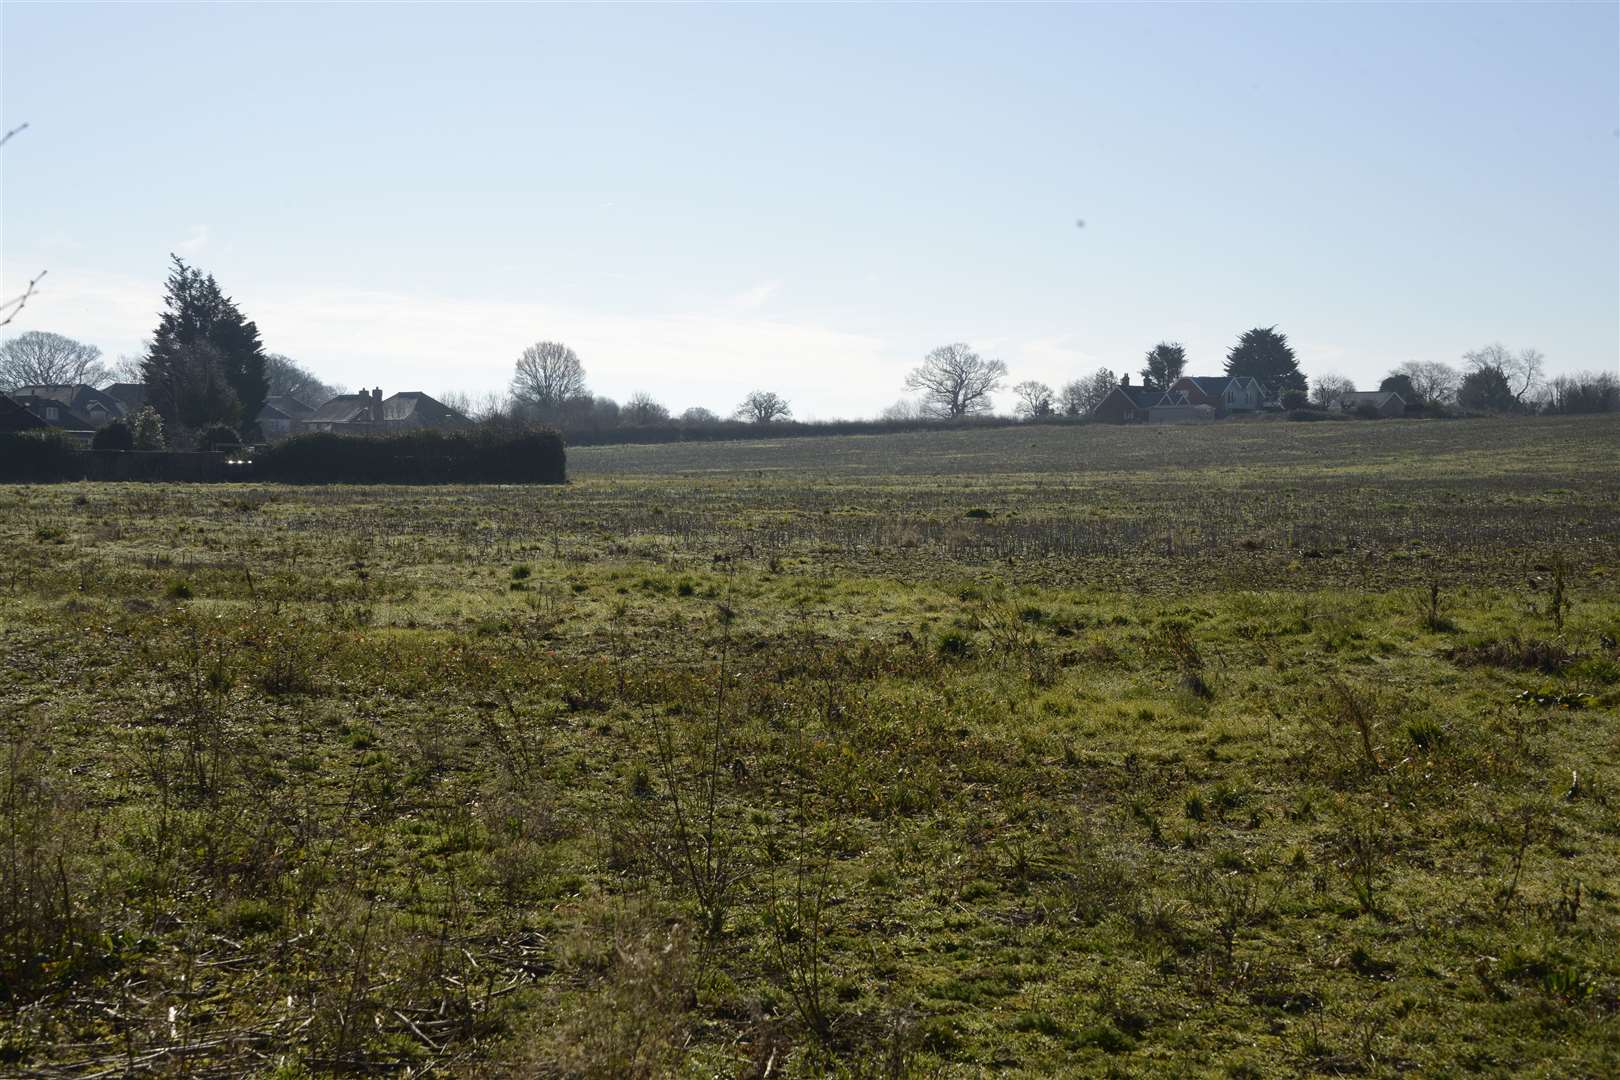 Part of the proposed Kingsnorth Green site